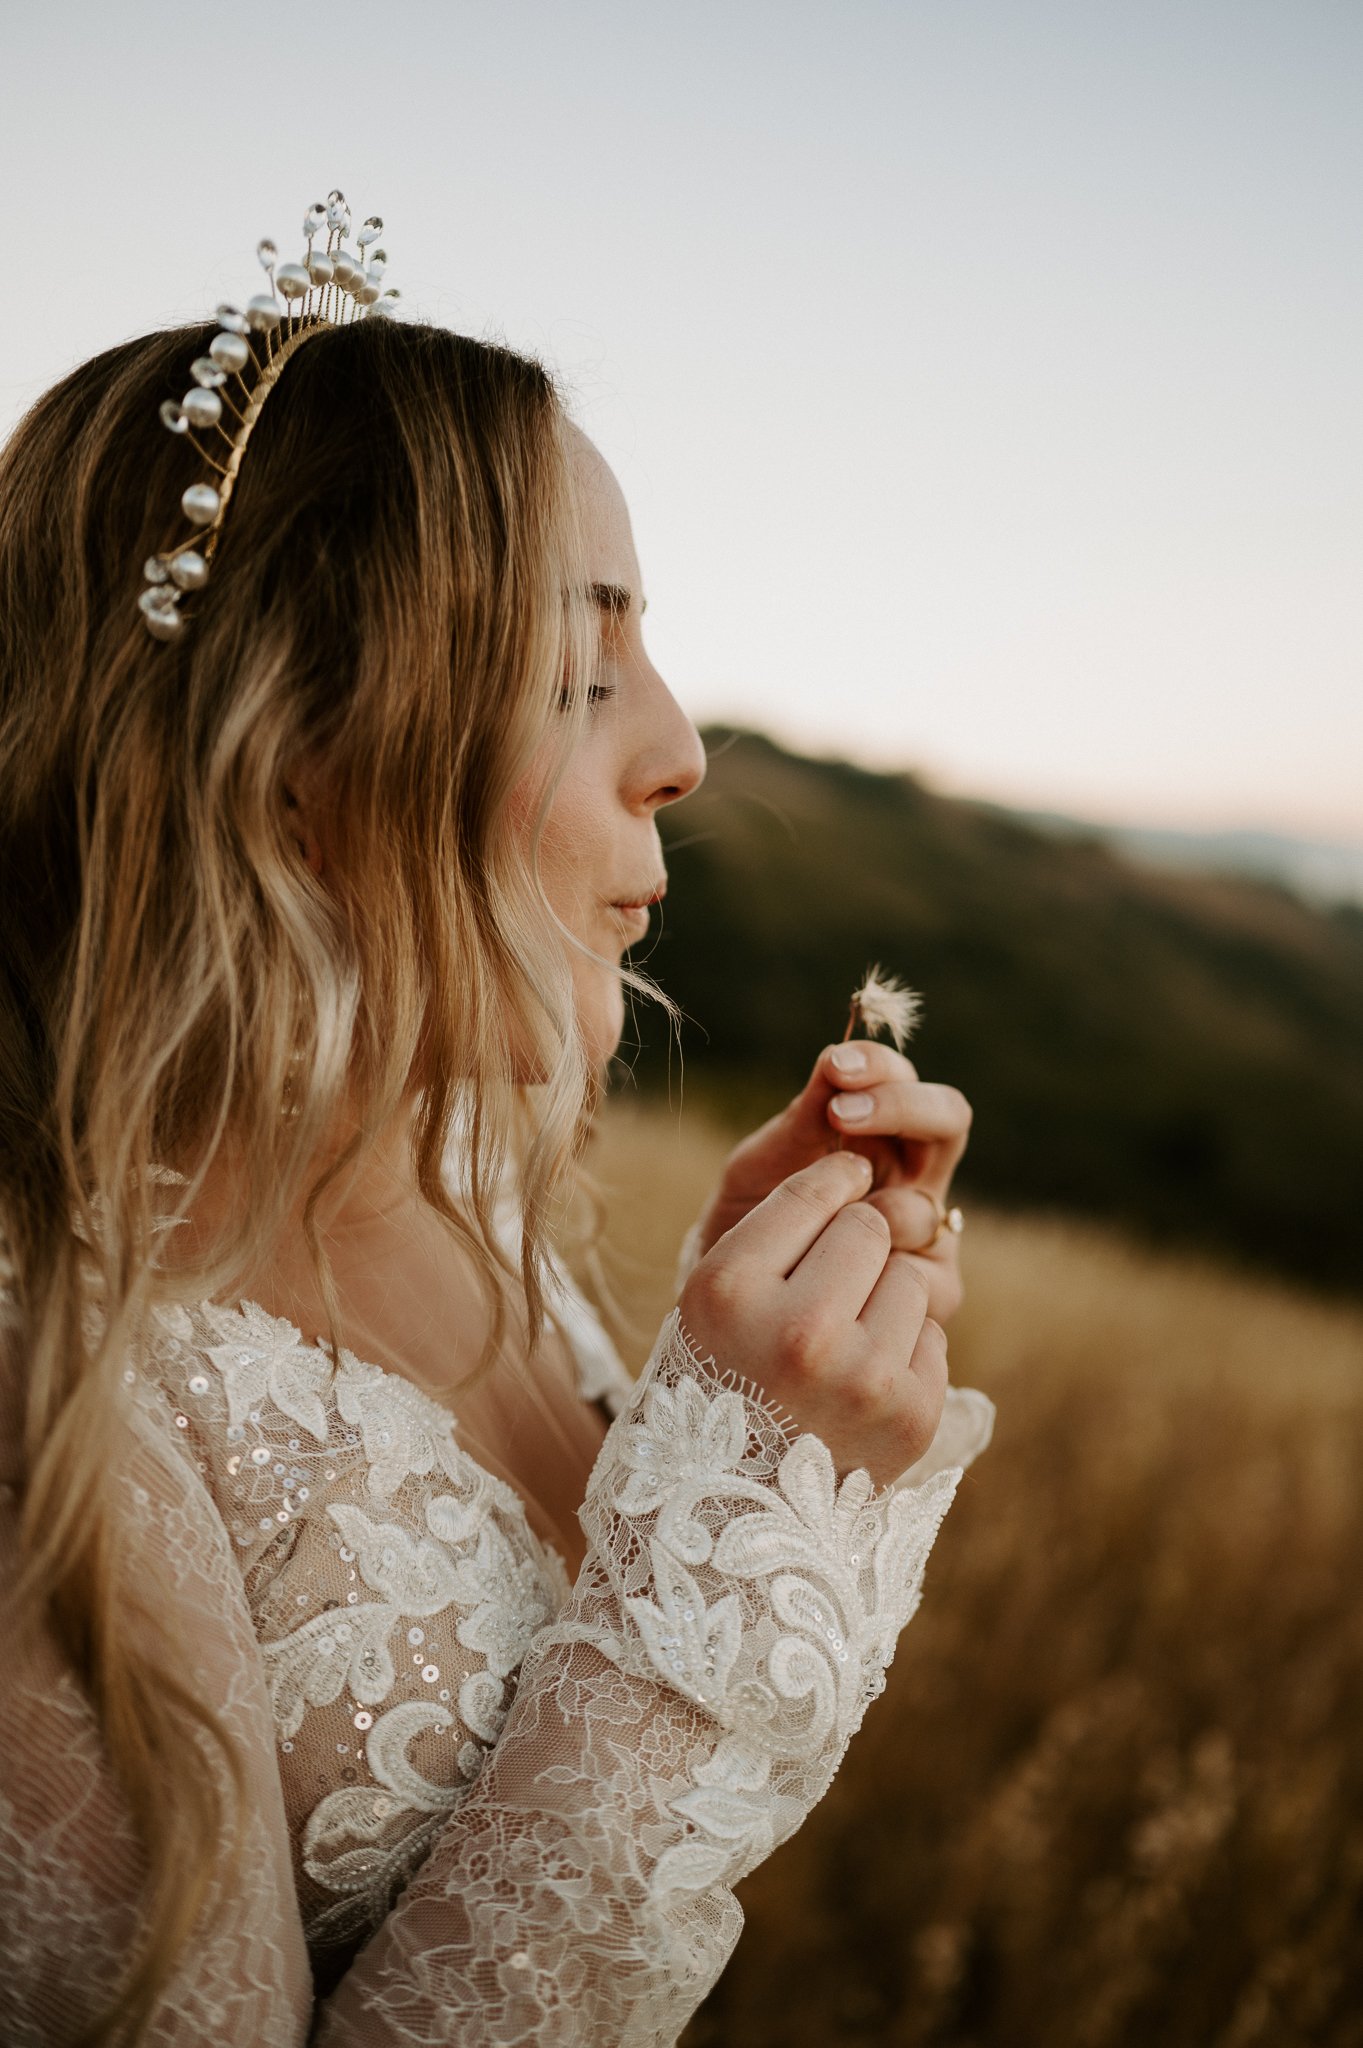 Big Sur brides upper body as she is blowing on a dandelion